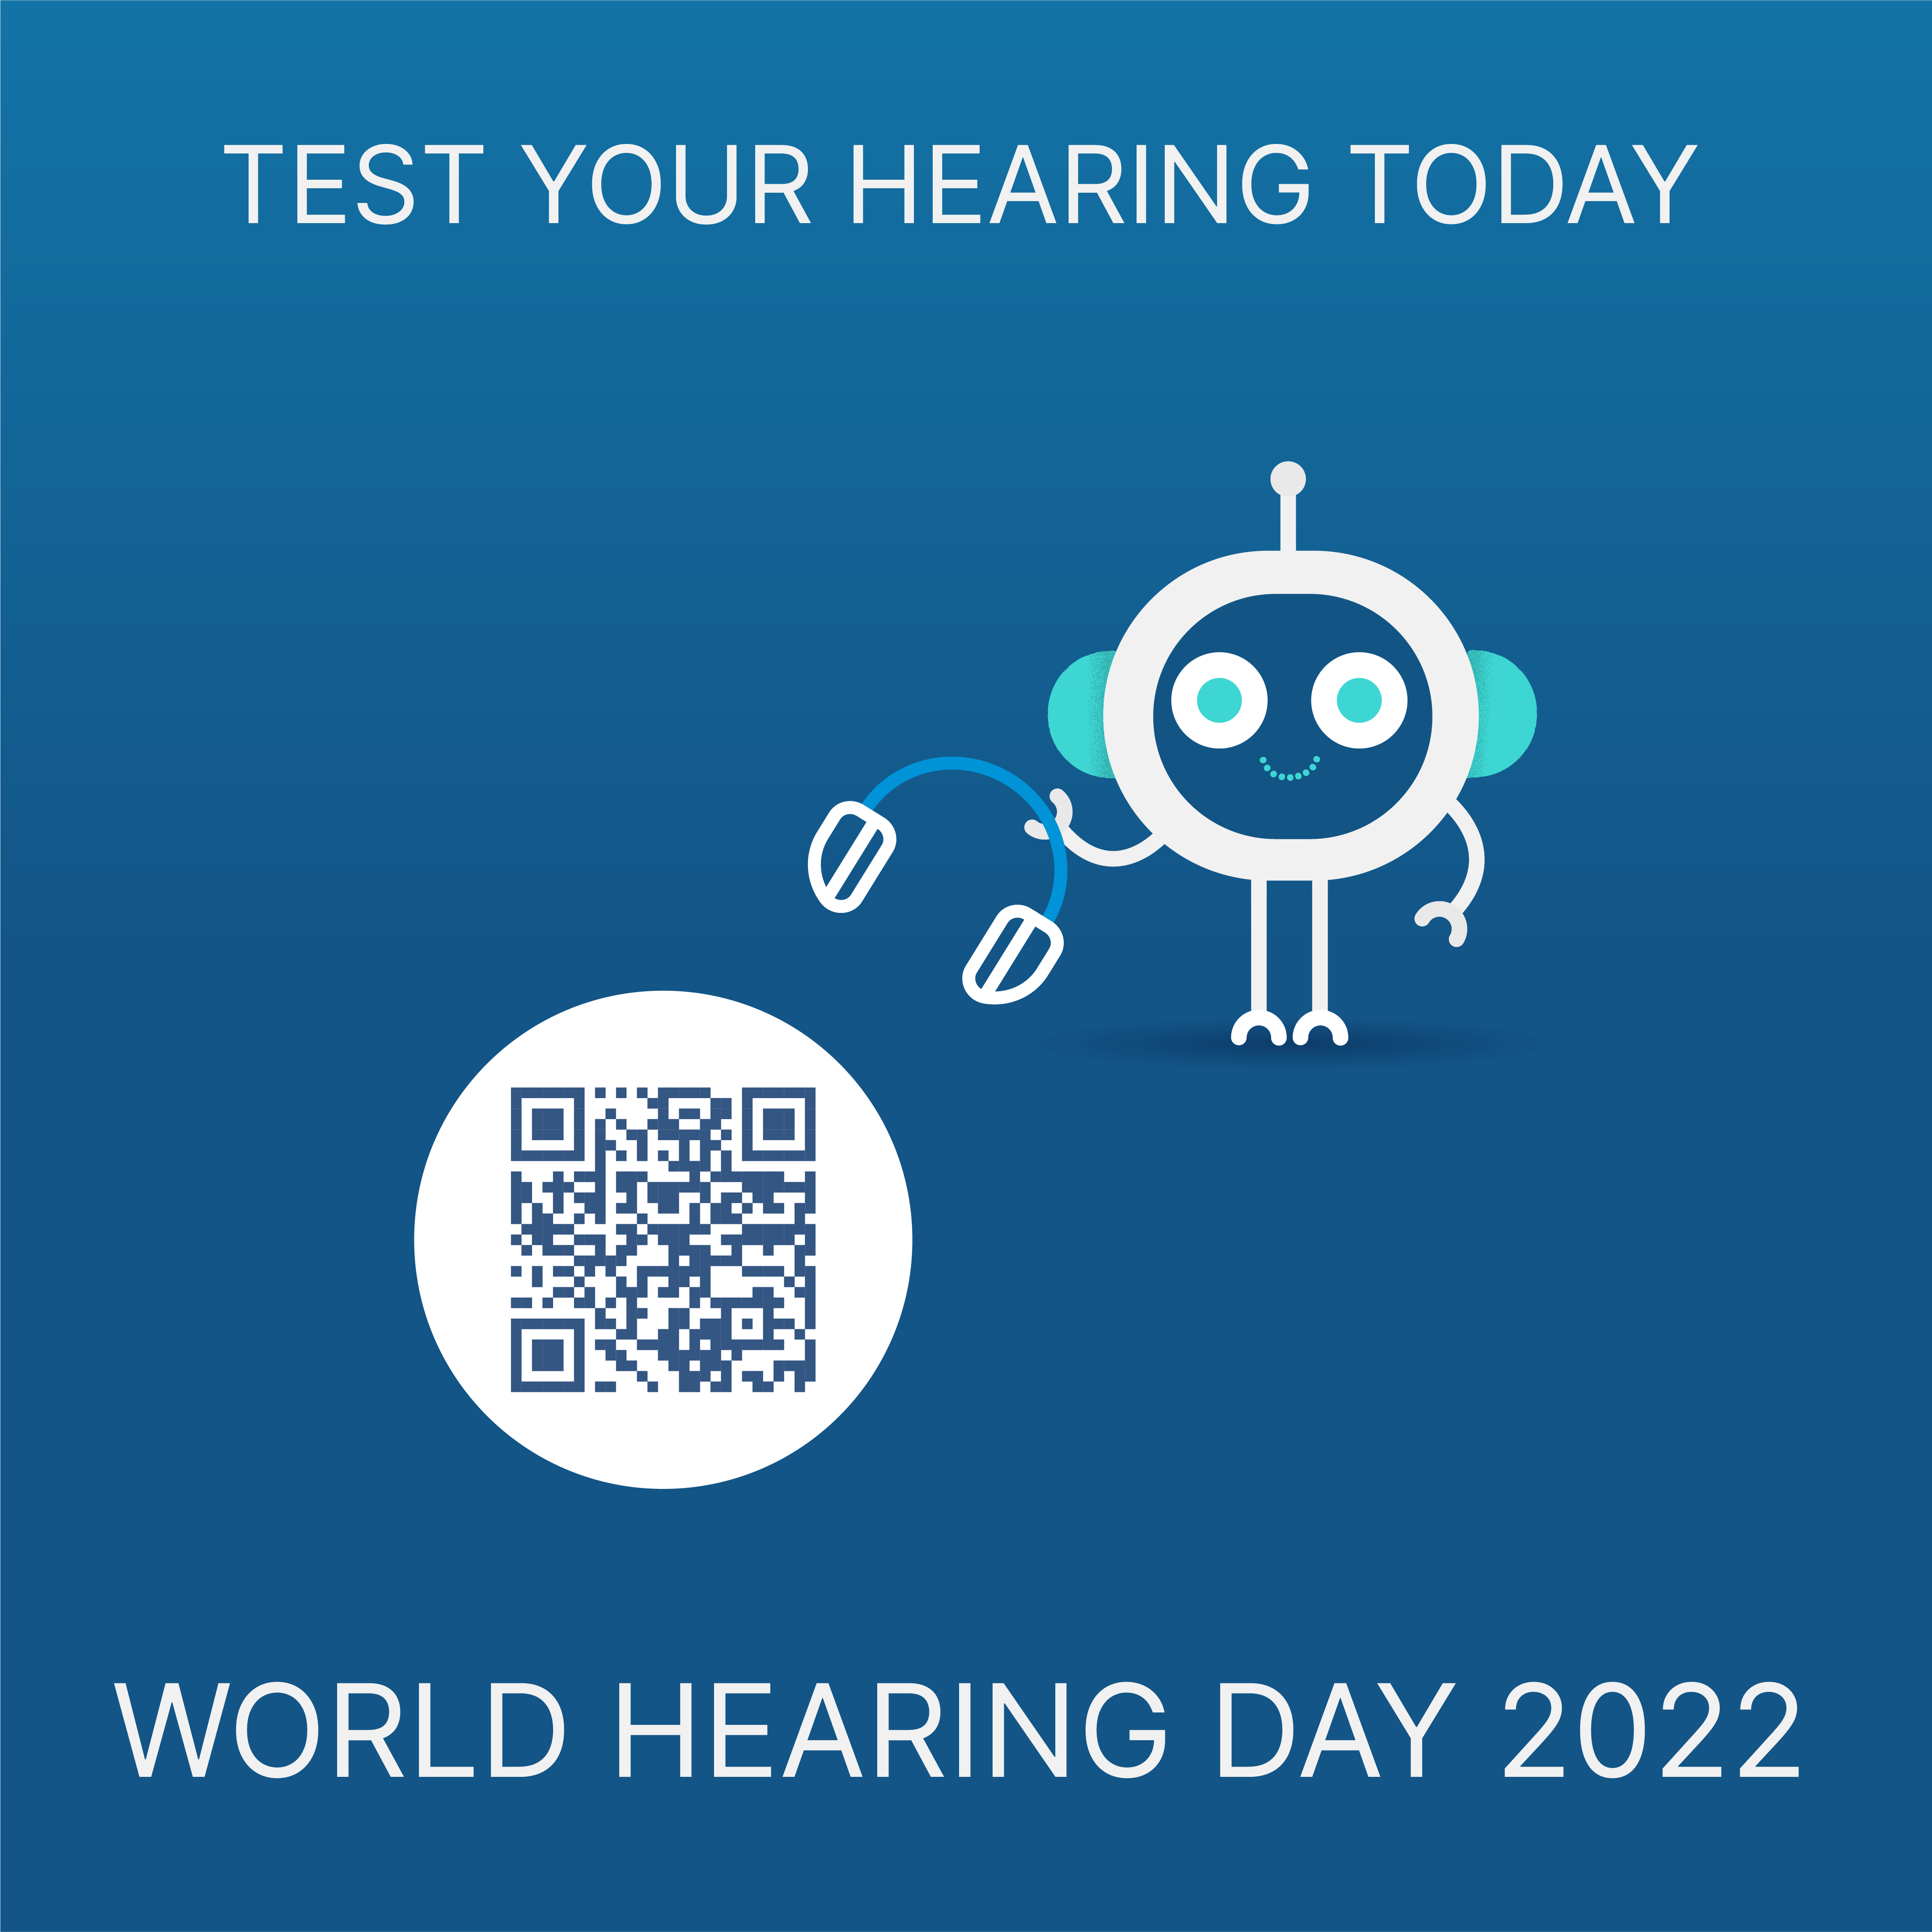 Test Your Hearing Today